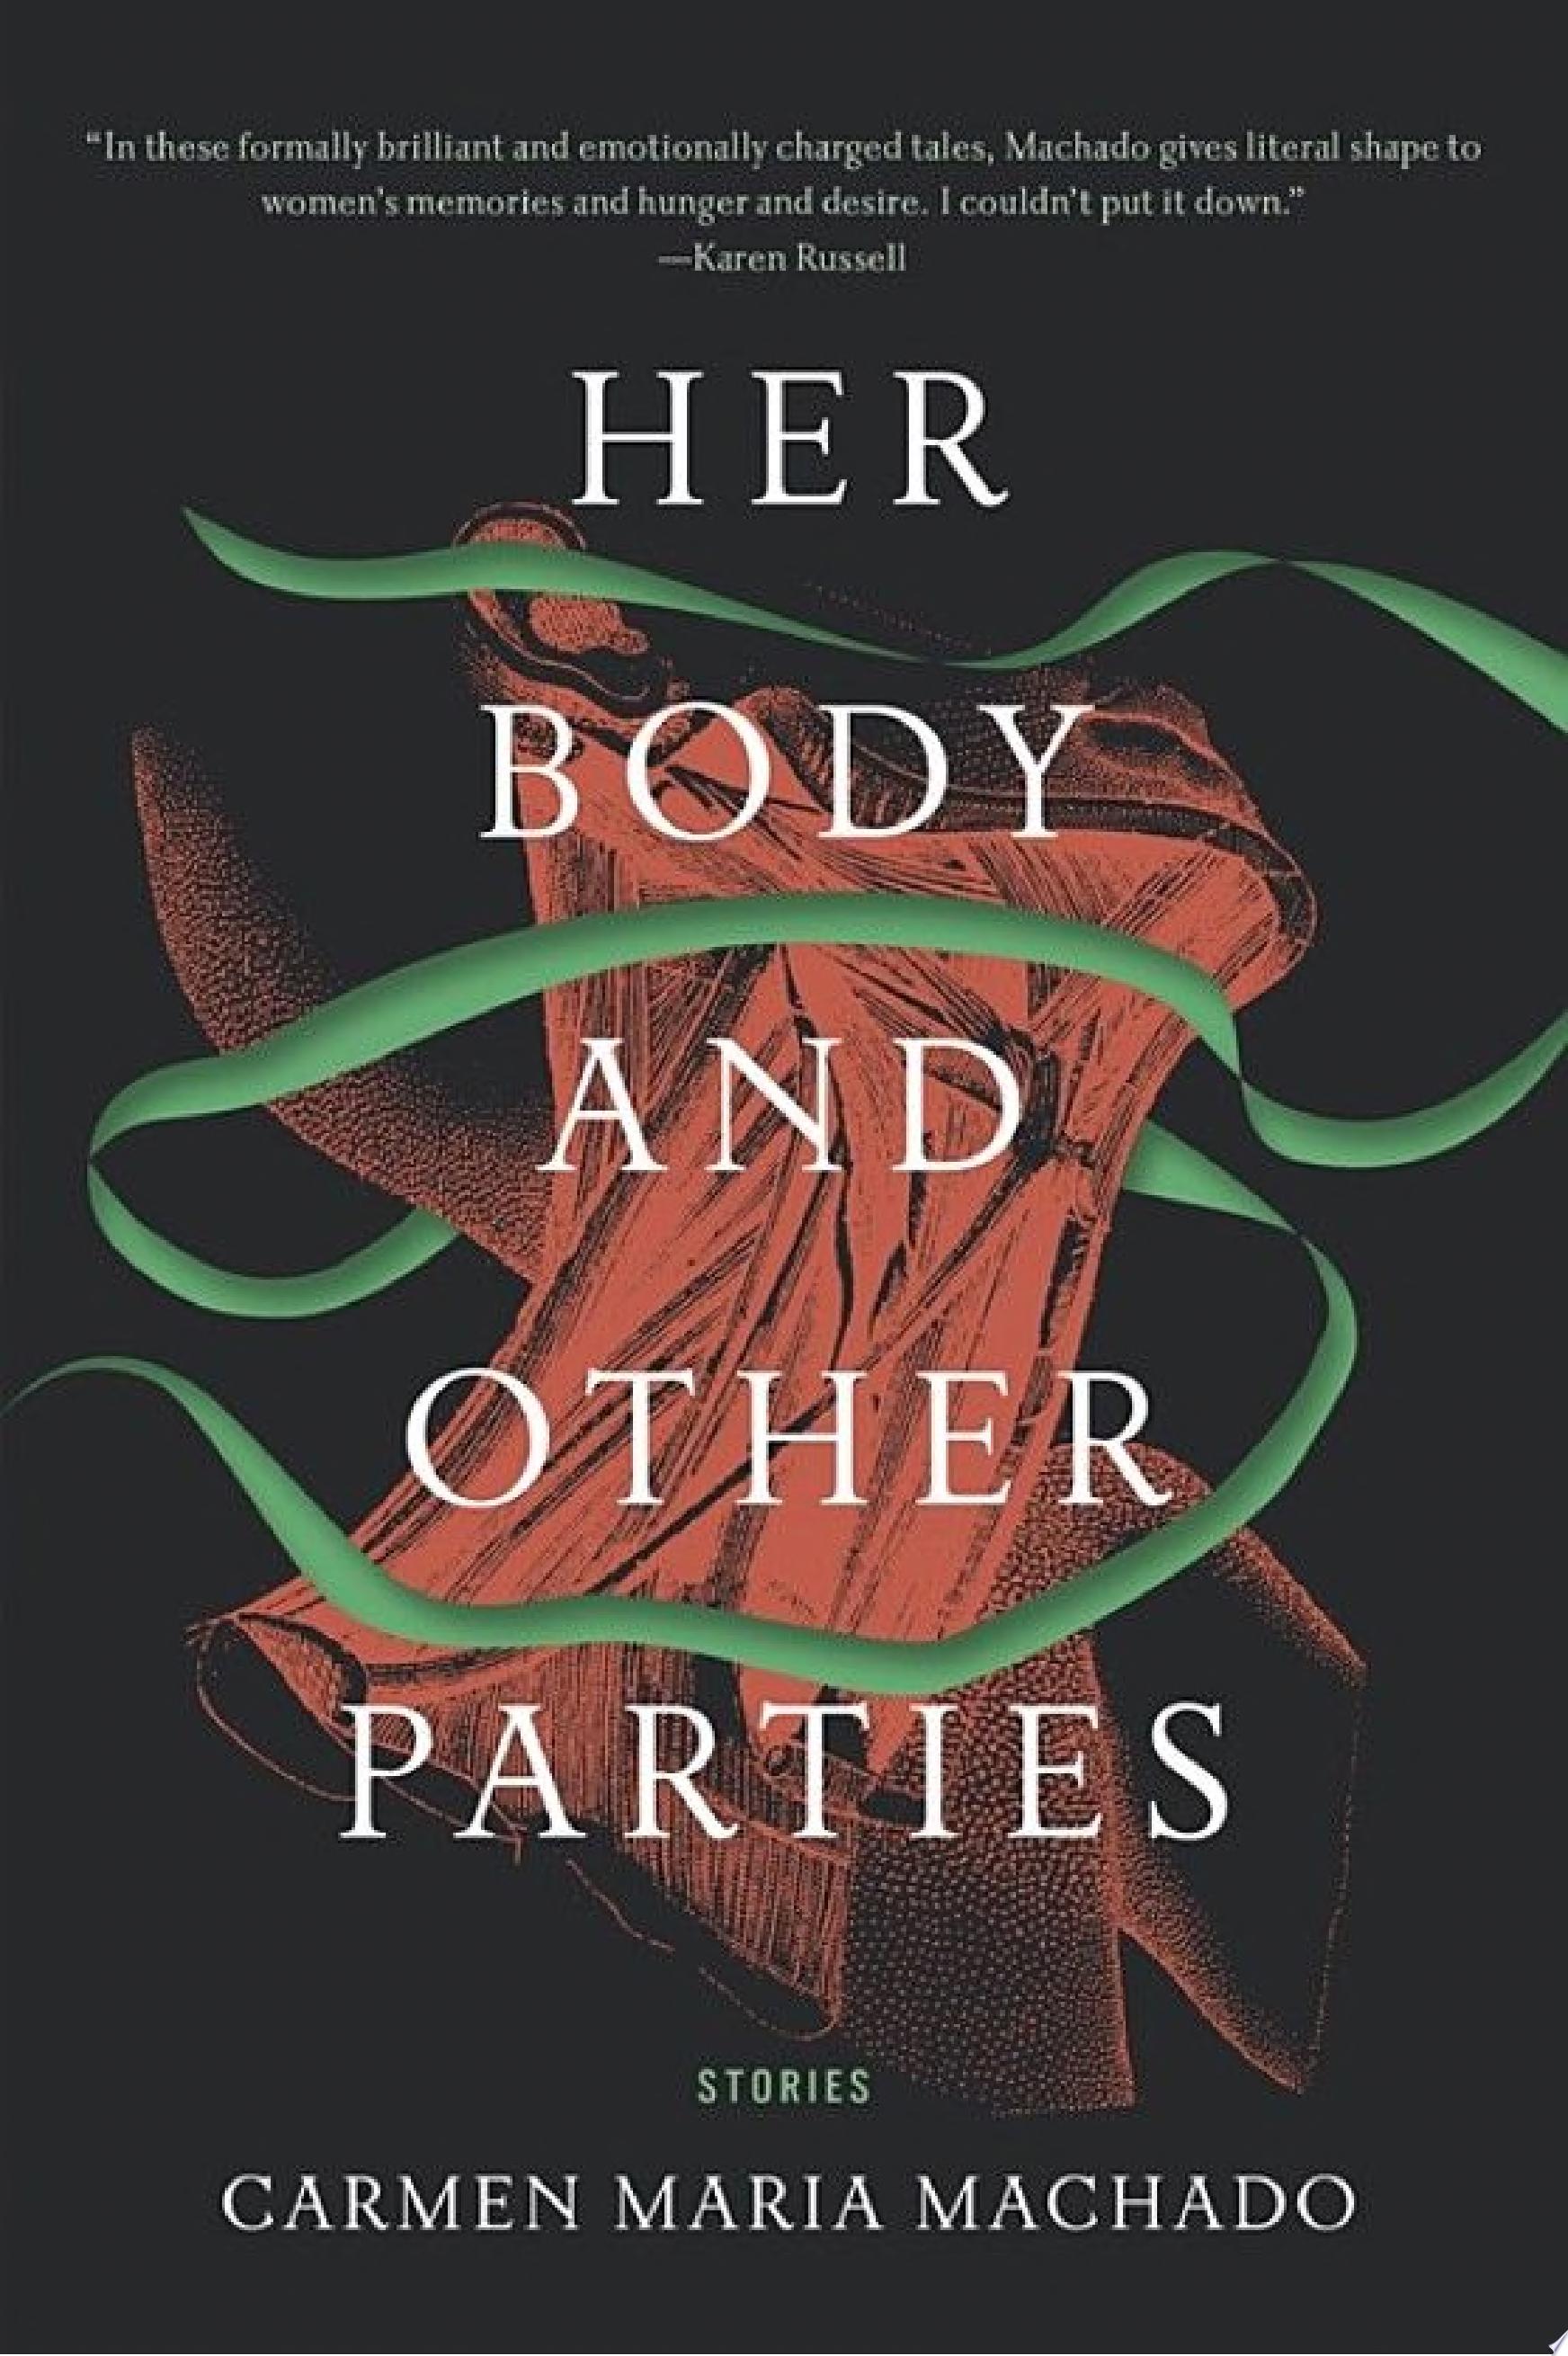 Image for "Her Body and Other Parties"